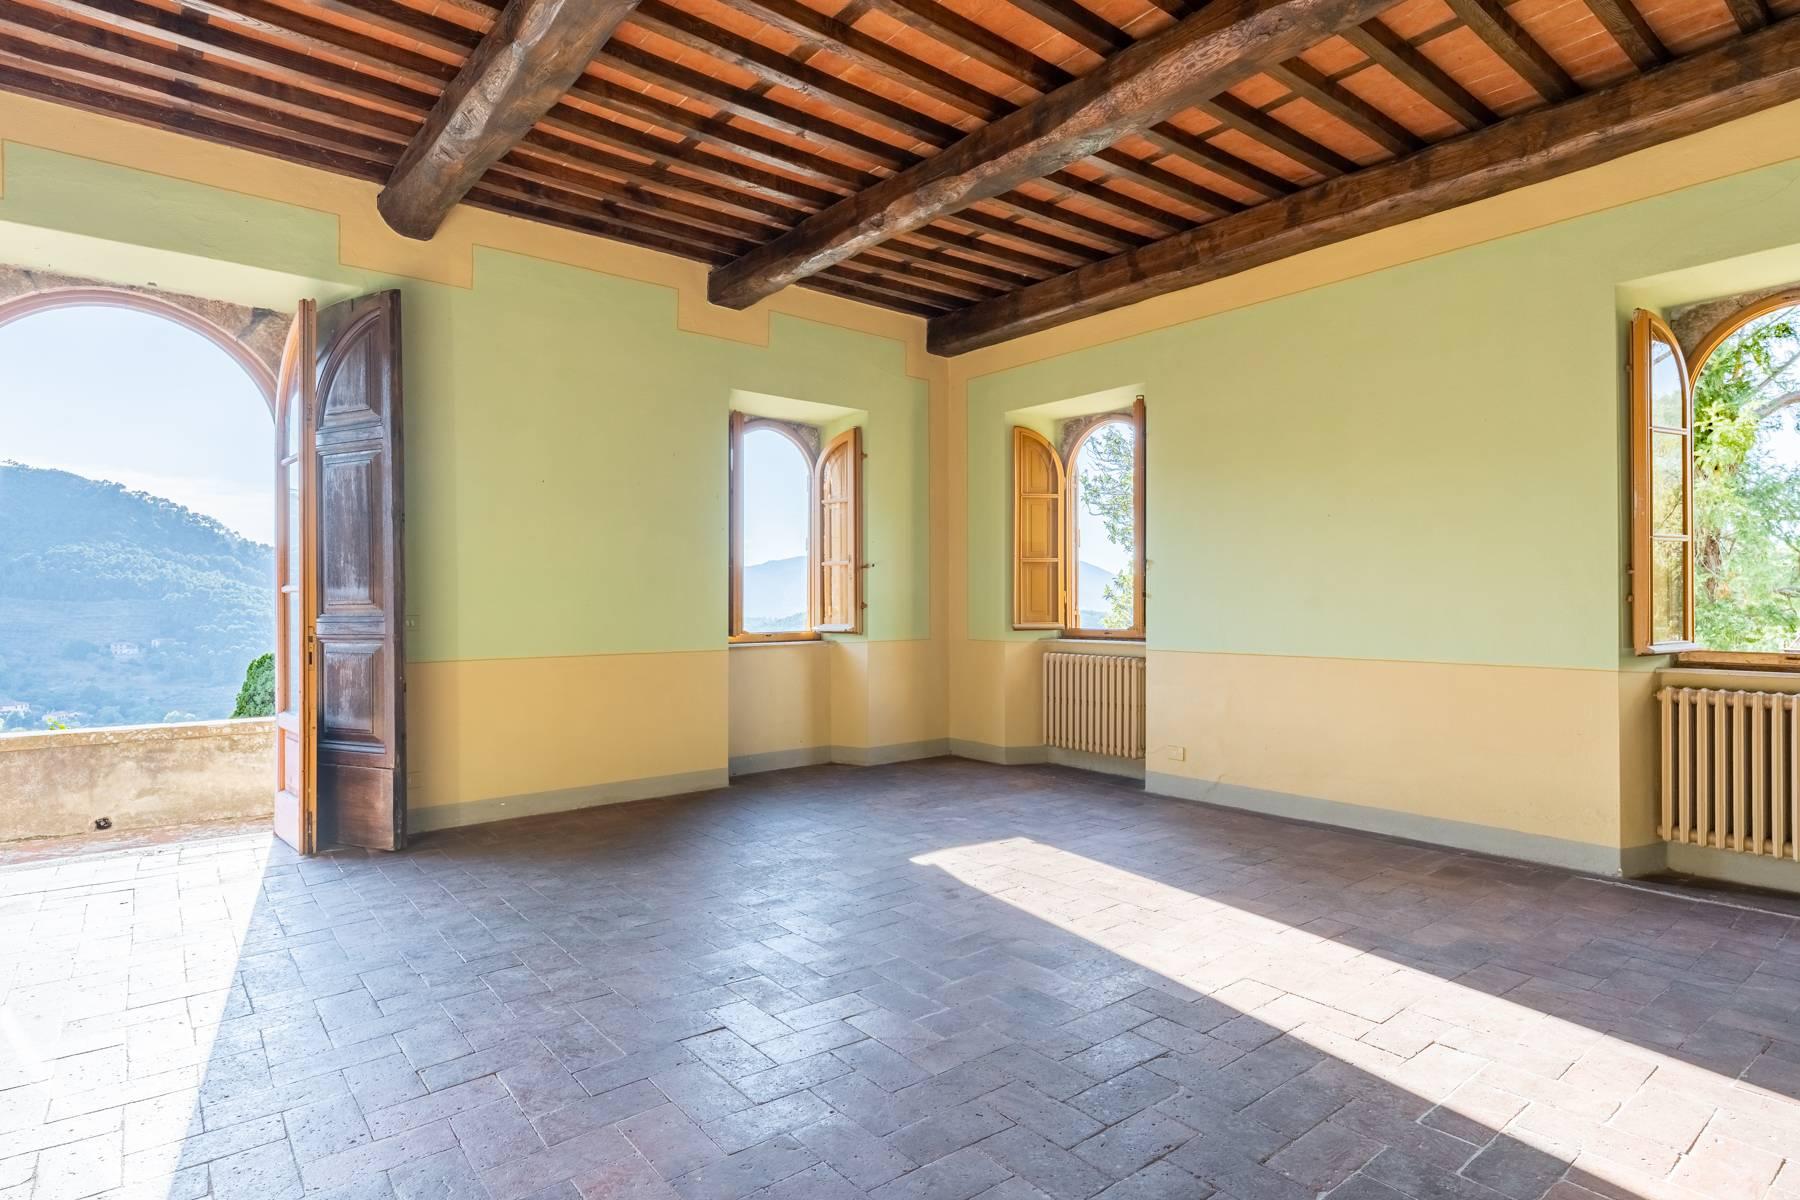 Superb villa with breathtaking views of the Lucca countryside - 16